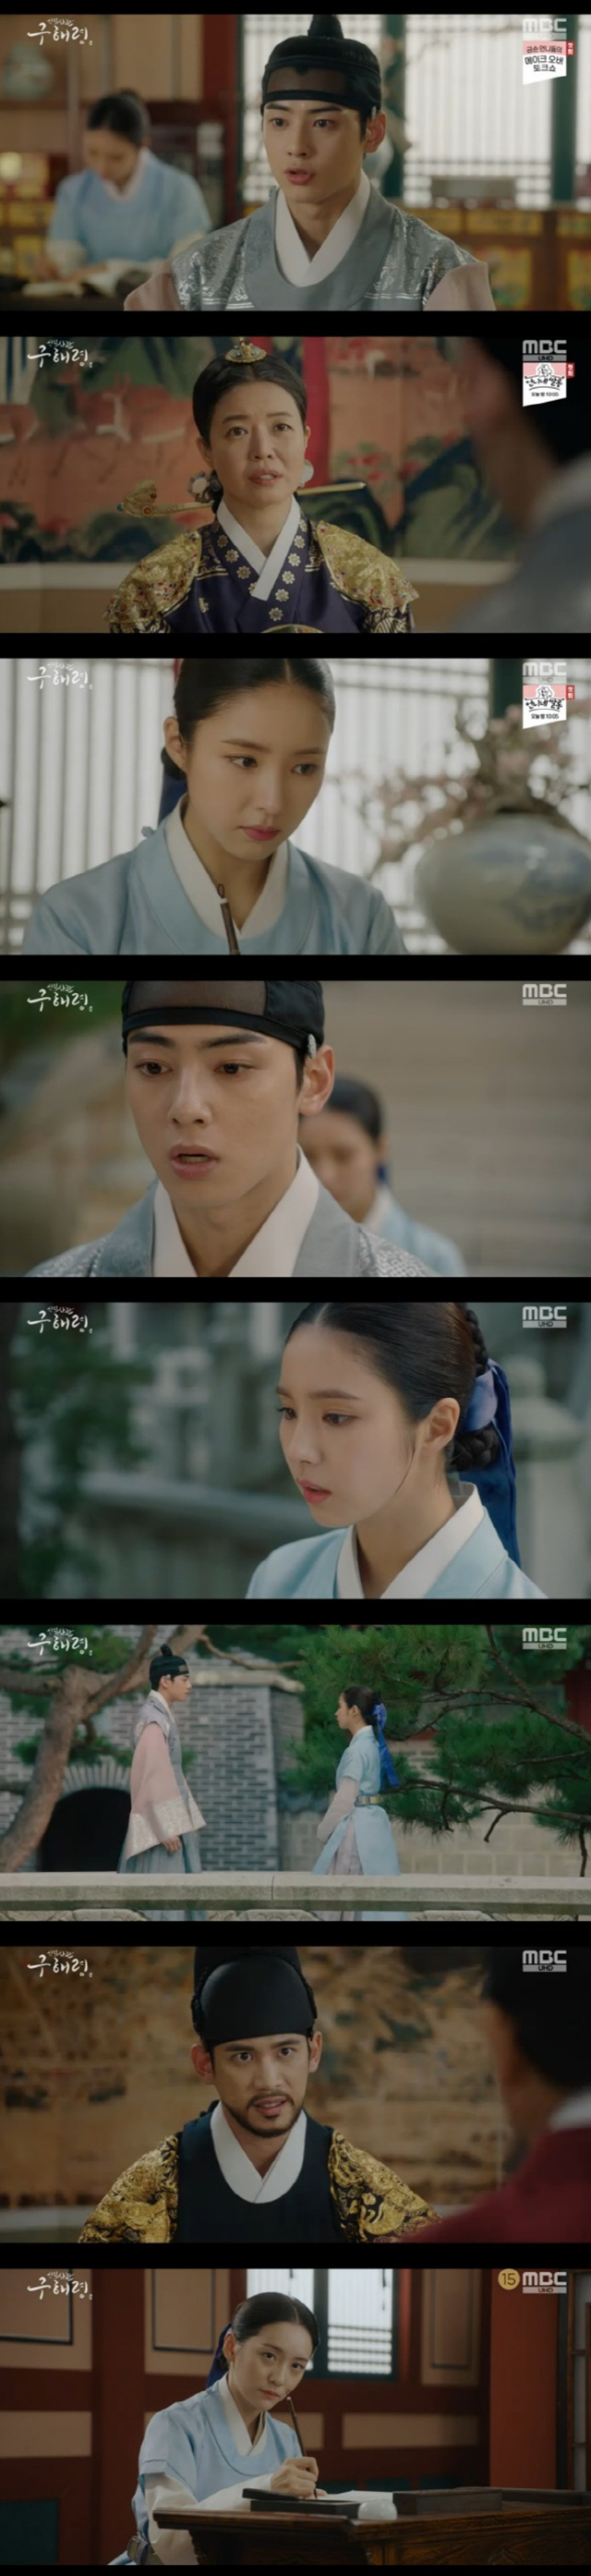 The new cadets, Na Hae-ryung, Shin Se-kyung and Cha Eun-woo, eventually parted ways.In the MBC drama Na Hae-ryung, which was broadcast on the 5th, Na Hae-ryung and Lee Lim (Cha Eun-woo) were drawn to meet the breakup DDanger.Na Hae-ryung and Irim, who came to romance with an unexpected Wedding Bible name.Lee then heard an order to set up the Garyecheong by Lee Tae (Kim Min-sang) of Hamyoung-gun, Hyunwang, and visited Dae-han Lim (Kim Yeo-jin) and asked, Please stop the marriage, there is a GLOW already in your heart.But I will not ask who the GLOW is. You do not have to know the name that goes by.The Taoist is the Sejo of Joseon in this country before being a man, and the marriage of Sejo of Joseon is not a private affair.How can you make me teach such a thing? I know how sad you are, but do not miss the ambassador of the human land.That is the way to do it for the Taoyuan and for the GLOW Lee then shouted to Na Hae-ryung, who seemed to be uncomfortable unlike himself, Is this a situation for you now? Show me what you feel?Na Hae-ryung said, I am noticing that I will be angry with Mama. What was Mama thinking?If Mama had accepted the request, did you think it would be enough to reveal my name and drag me to Wedding Bible regardless of my heart and will?I have made it clear that I do not want to live my whole life as a couple in the book. Nevertheless, Irim said, I do not care if you do not want it. Stay with me.Otherwise, will I lose you? and Tell me honestly that you do not want me to marry another GLOW, but Na Hae-ryung said, Its a fish name.Follow me, he said, then turned cold.Since then, regardless of Na Hae-ryung and Irims mind, the Wedding Bible preparations have been fast.Na Hae-ryung was in charge of Lee Rims Wedding Bible course record.Na Hae-ryung, who tried to pretend to be okay in front of Lee, resigned to his ironic fate, drank alone and soothed his sick mind.However, Song Sa-hee (Park Ji-hyun) was nominated as a couple under the leadership of Min Ik-pyeong (Choi Deok-moon).I do not intend to marry Sejo of Joseon, he said, but Min-pyeong declared, Become a couple of Sejo of Joseon. Lee Jin (Park Ki-woong) was confused about this fact.Song and Lee Jin stayed up all night talking about what might be the last time, but the courtesans were in controversy when they saw Song Sa-hee coming out of the palace in the morning.Sejabin revealed his Danger to Song Sahee and said, Do not be confused.I do not want you to be your person no matter what you do, said Song Sahee. I just wanted the degradation to know my mind.I do not regret my life even if it can be ruined. Irim, who was in the Wedding Bible preparation, continued to struggle with Na Hae-ryung.Irim, who recalled the moments of happiness with Na Hae-ryung, eventually visited Na Hae-ryung during the night.If you do not want to live as the wife of Sejo of Joseon, I will not be Sejo of Joseon. Lets go to a place where no one knows and live happily together. But Na Hae-ryung, rejecting reality is not a novel, said meekly, go back, Im the only one who can do this much.Irim once again caught me saying, You are everything to me, but Na Hae-ryung refused to say, Im sorry, Im not.